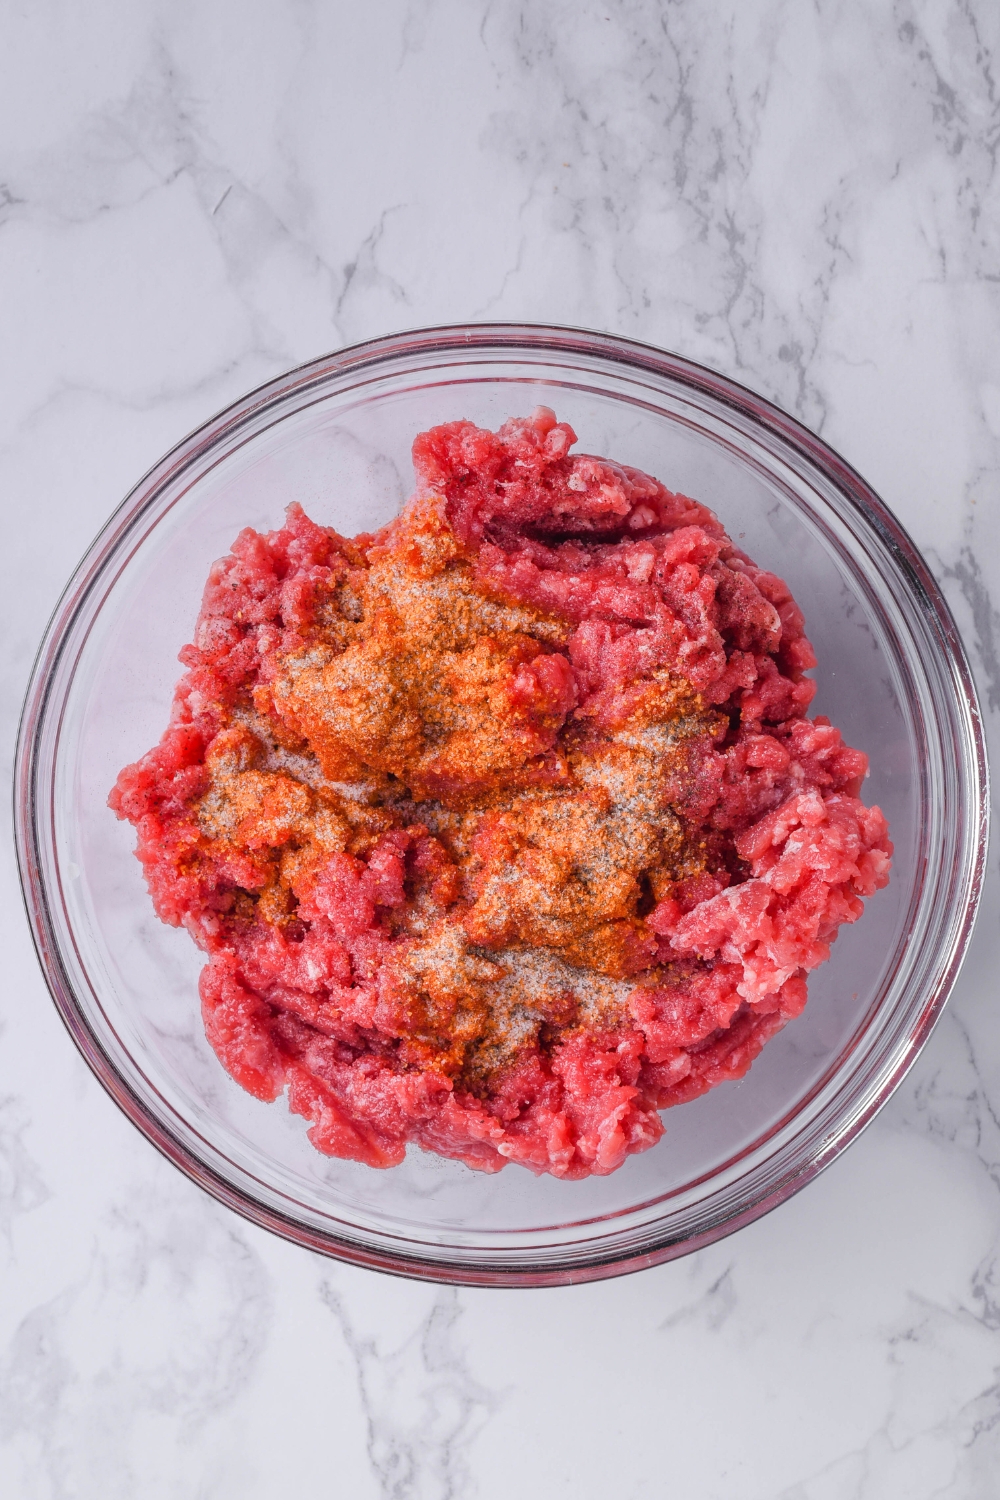 A mixing bowl with lean ground beef and old bay seasonings.